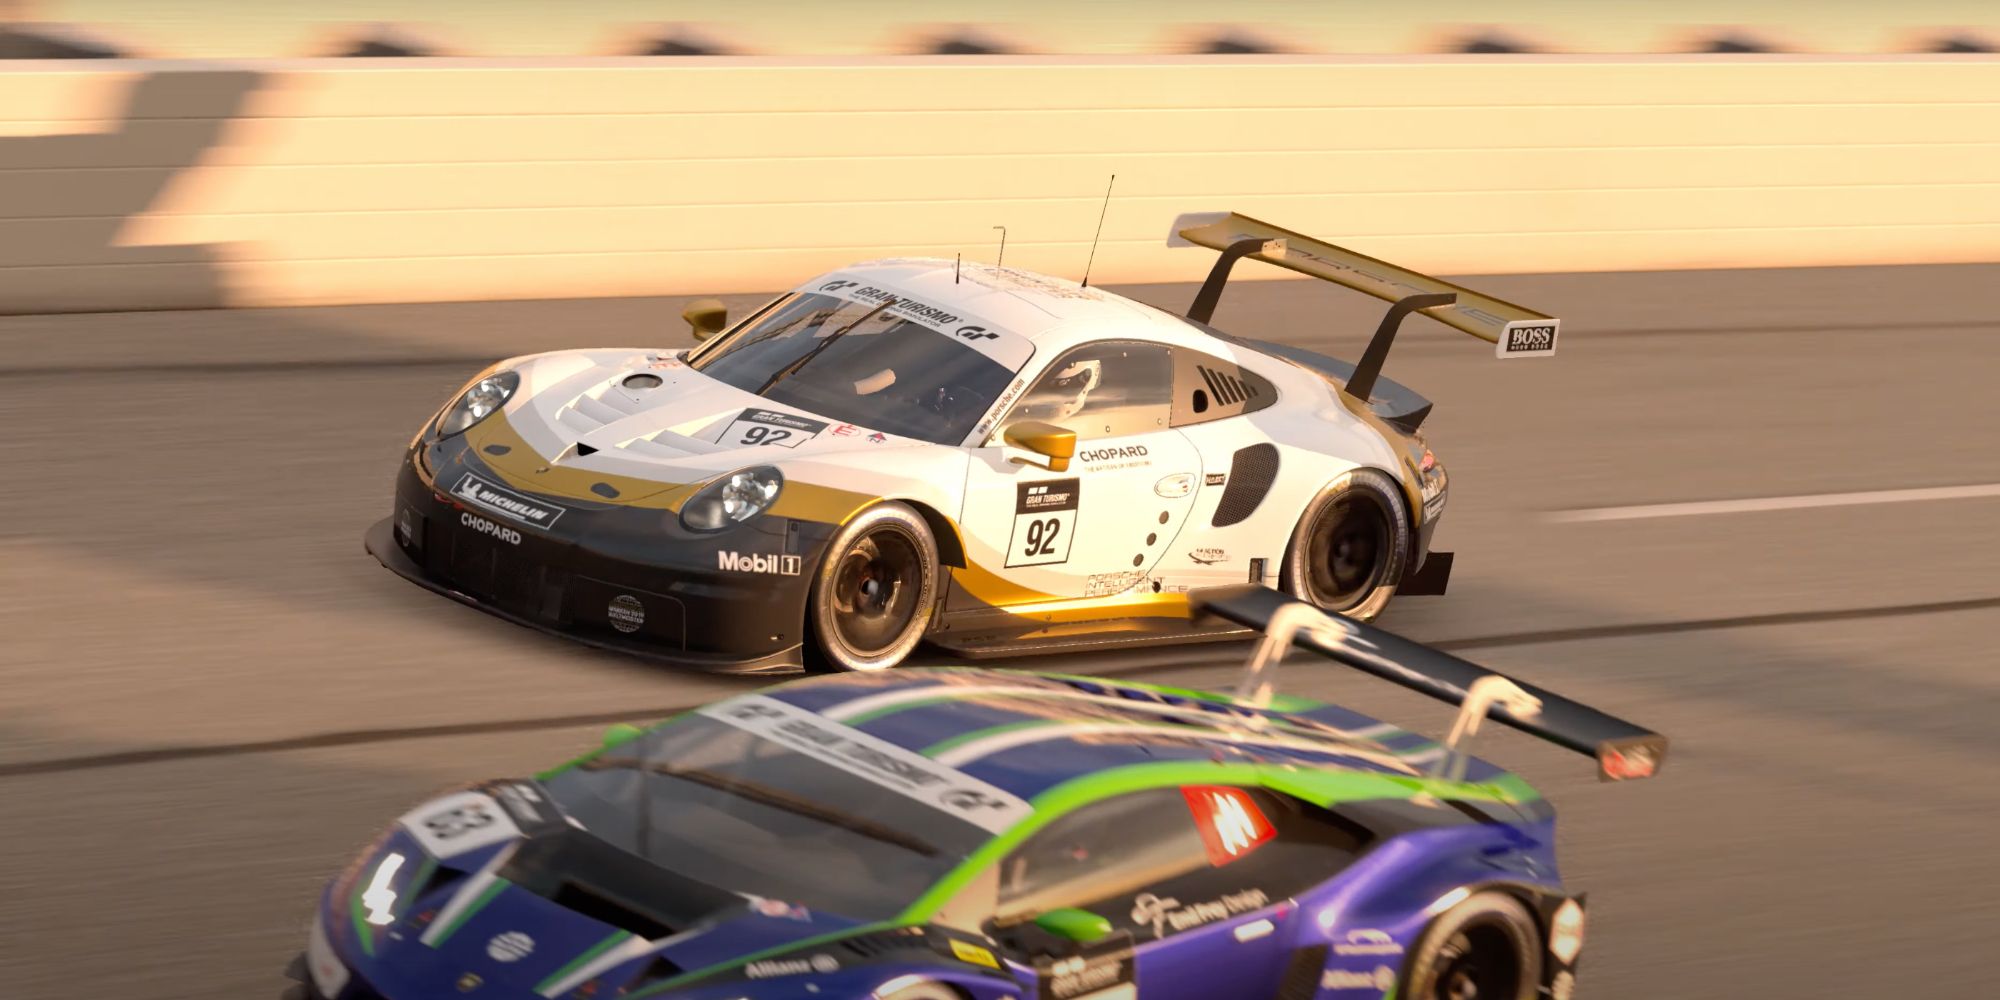 Gran Turismo 7's lighting looks incredible despite it not using ray tracing during races